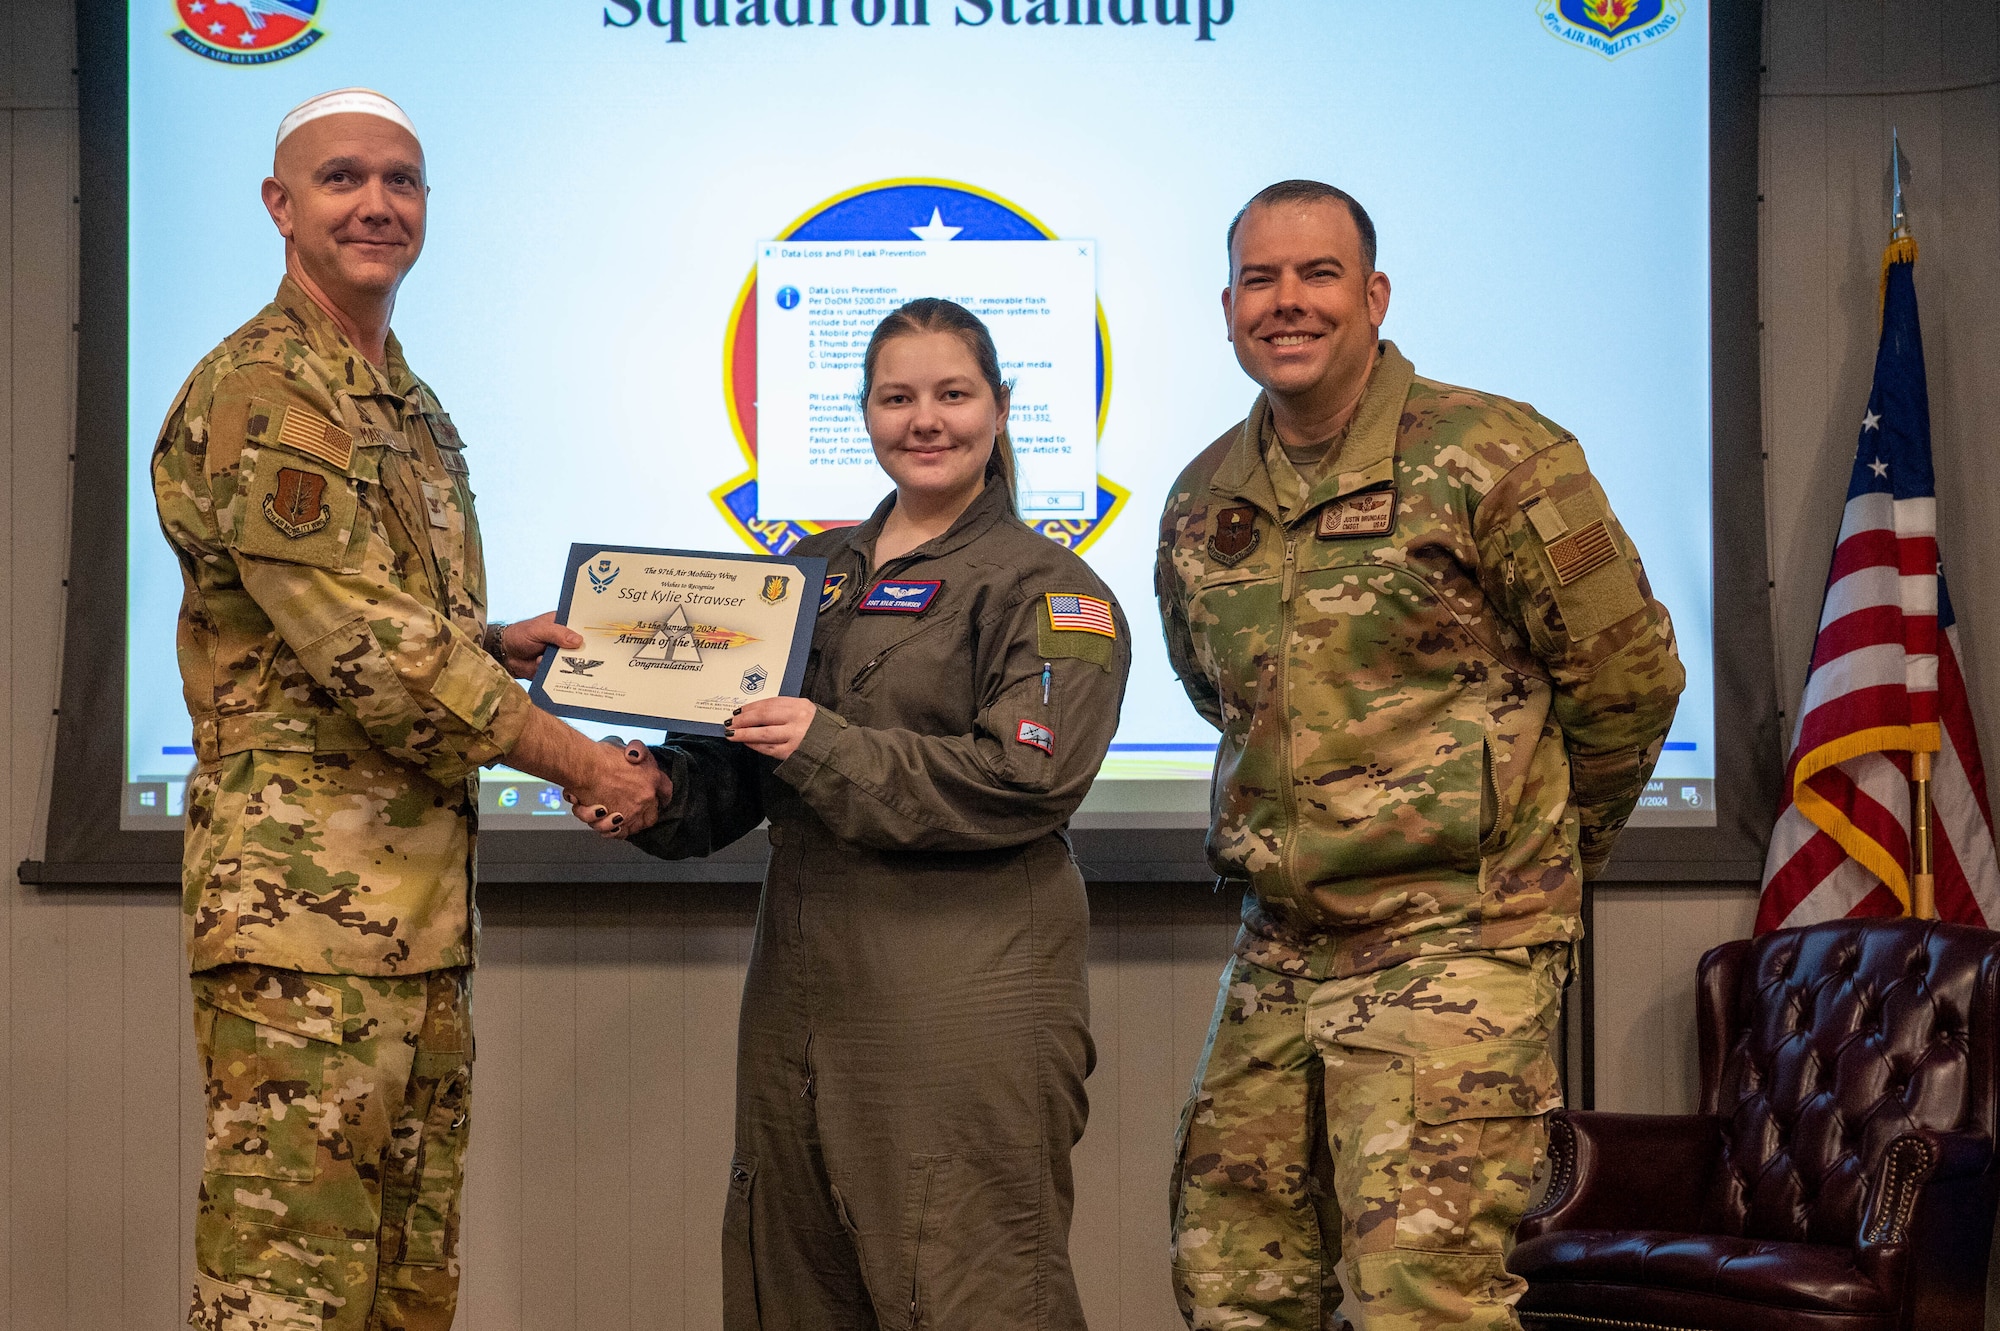 U.S. Air Force Staff Sgt. Kylie Strawser, 54th Air Refueling Squadron boom operator instructor, center, is named the January 2024 Airman of the Month by Col. Jeff Marshall, 97th Air Mobility Wing (AMW) commander, left, and Chief Master Sgt. Justin Brundage, 97th AMW command chief, right, at Altus Air Force Base, Oklahoma, March 11, 2024. When she’s not teaching new students on the KC-135 Stratotanker aircraft, Strawser is the unit’s suicide prevention implementor, where she provides training and support throughout her squadron. (U.S. Air Force photo by Airman 1st Class Heidi Bucins)